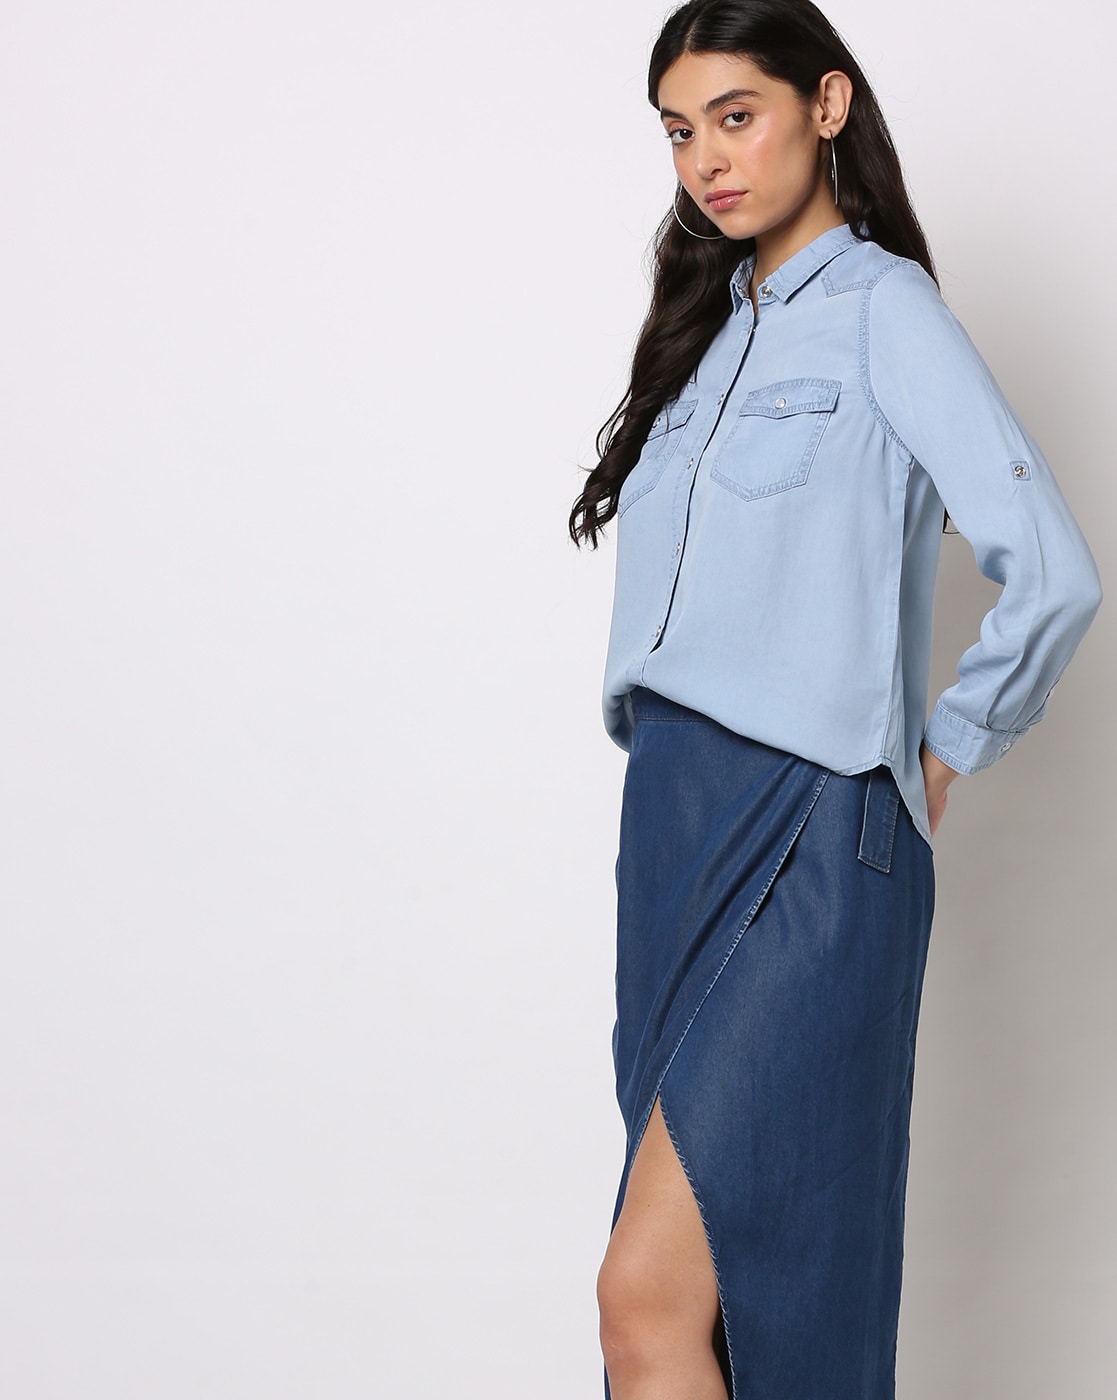 Chambray Top and Silk Skirt - Curated by Jennifer